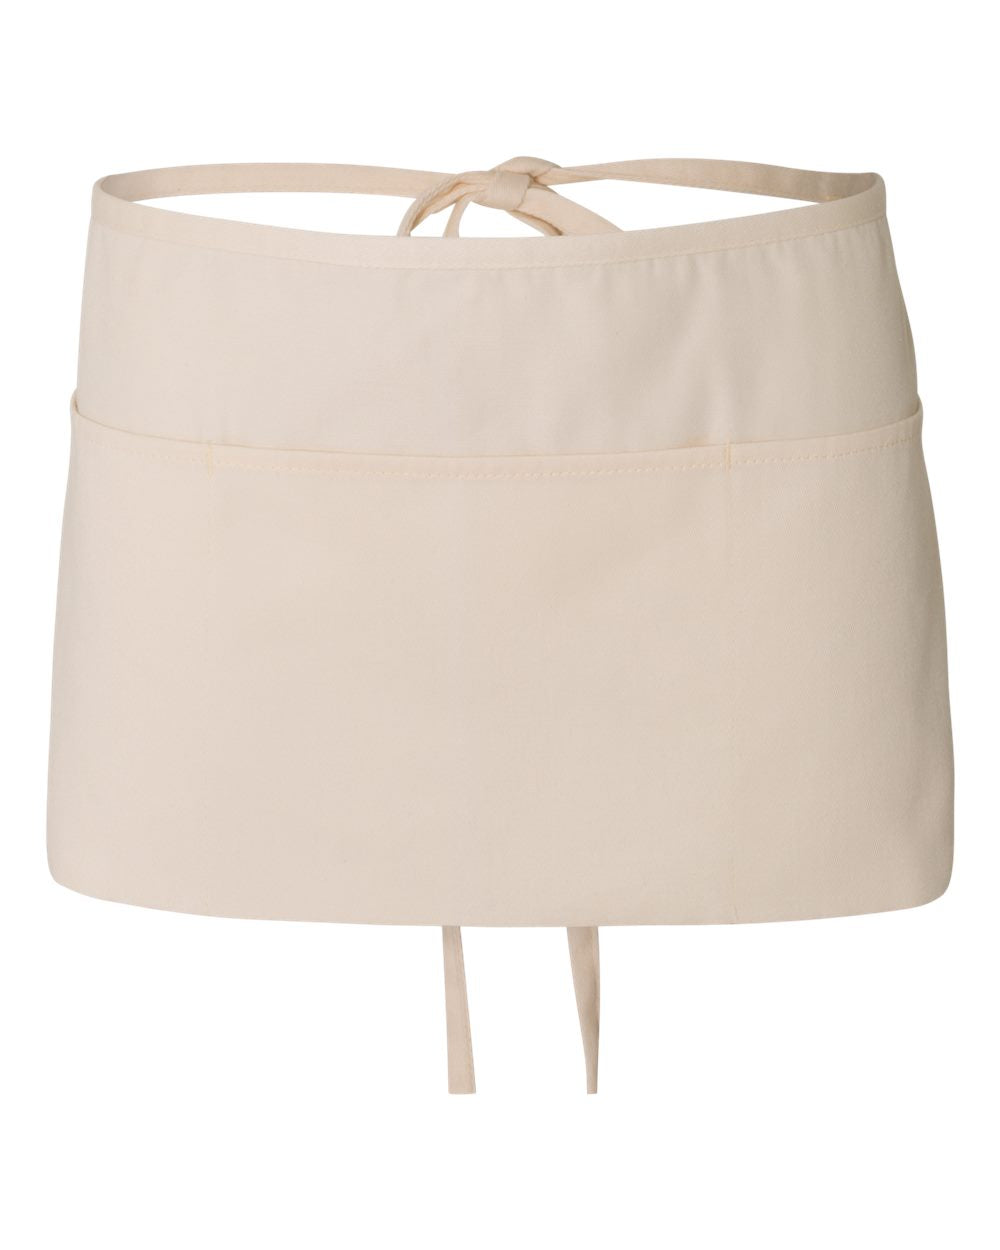 Q-Tees Waist Apron with Pockets Q2115 #color_Natural